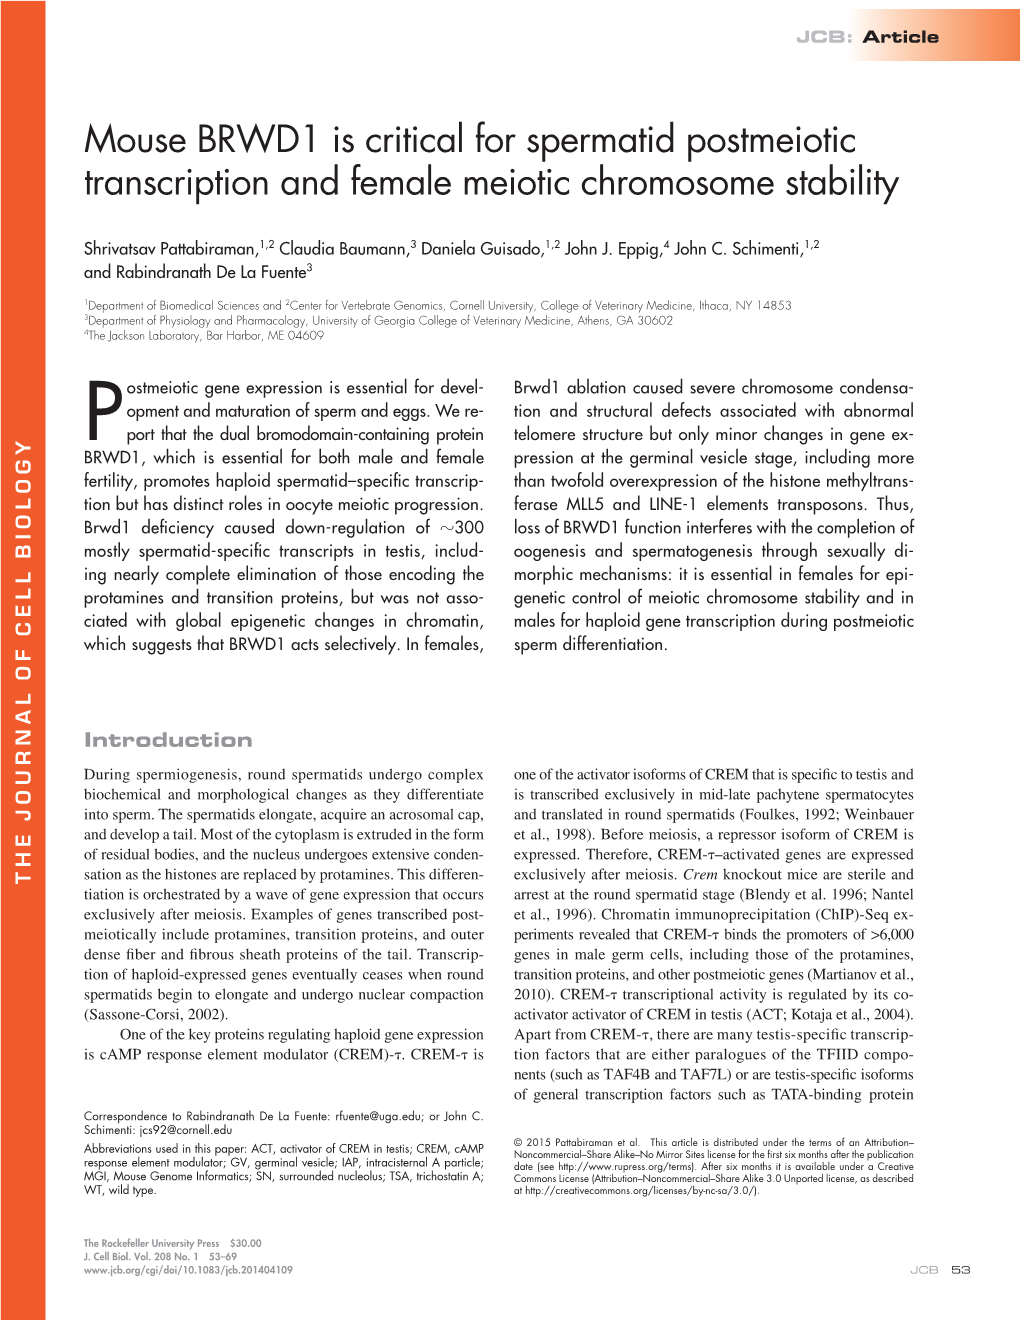 Mouse BRWD1 Is Critical for Spermatid Postmeiotic Transcription and Female Meiotic Chromosome Stability